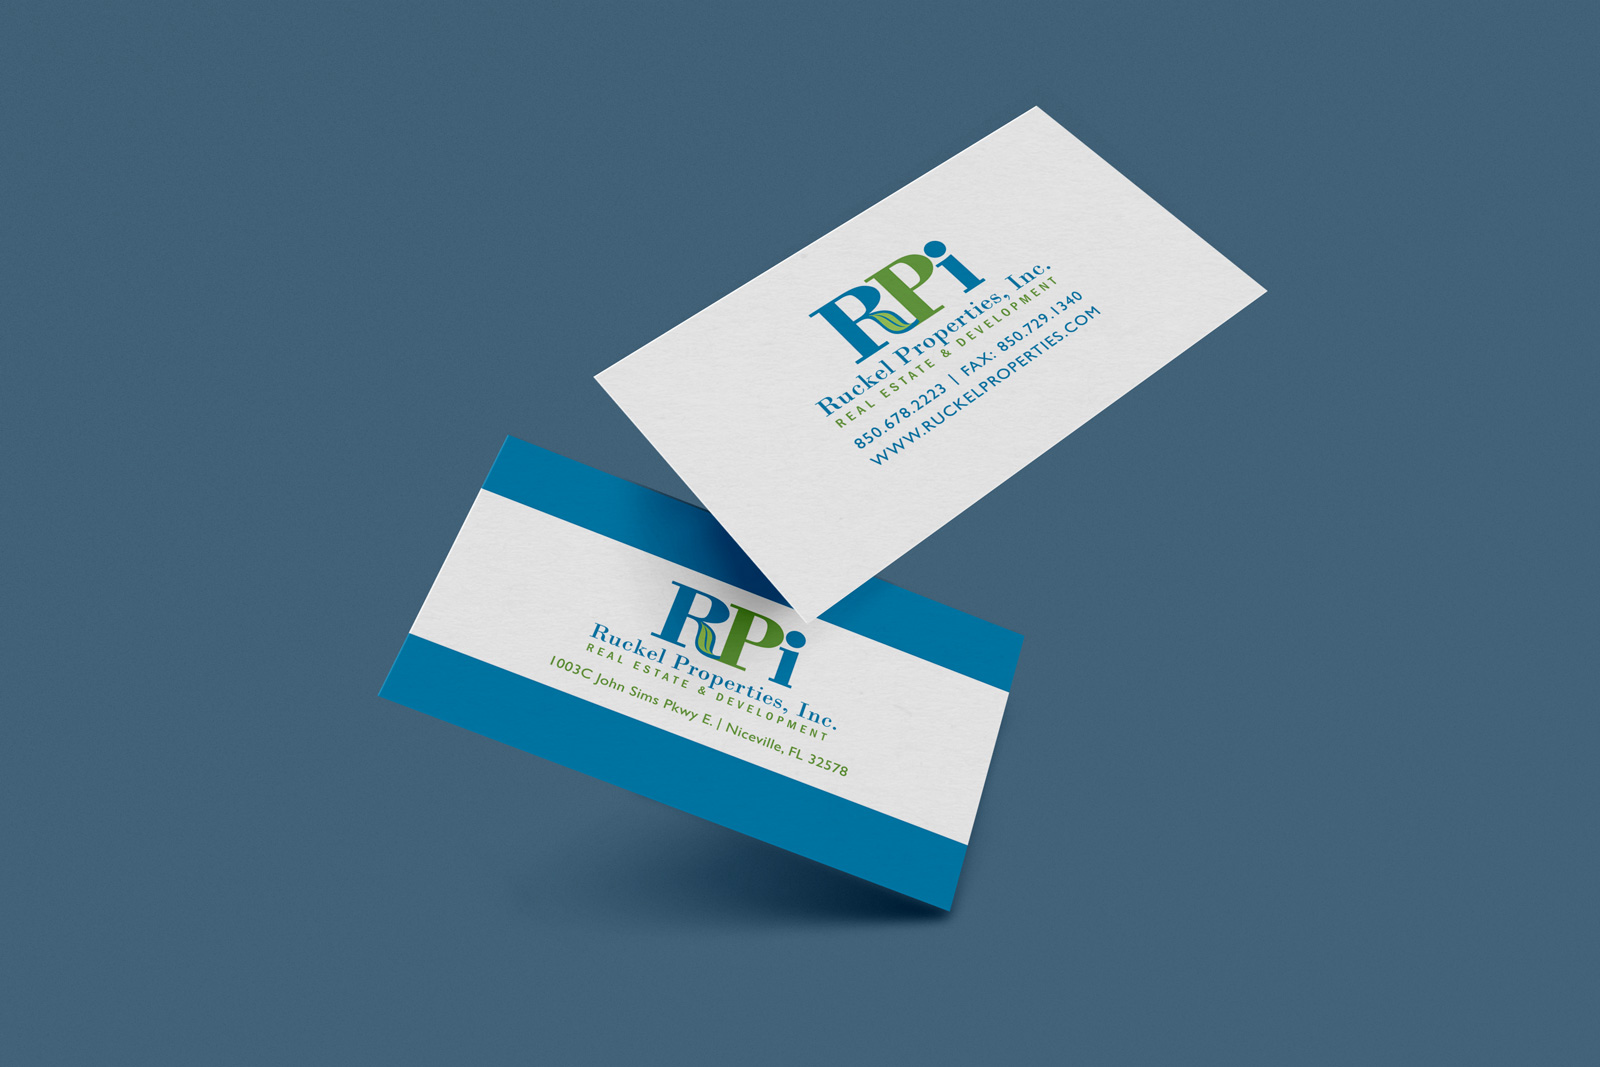 Blue and green designed business cards for real estate development company